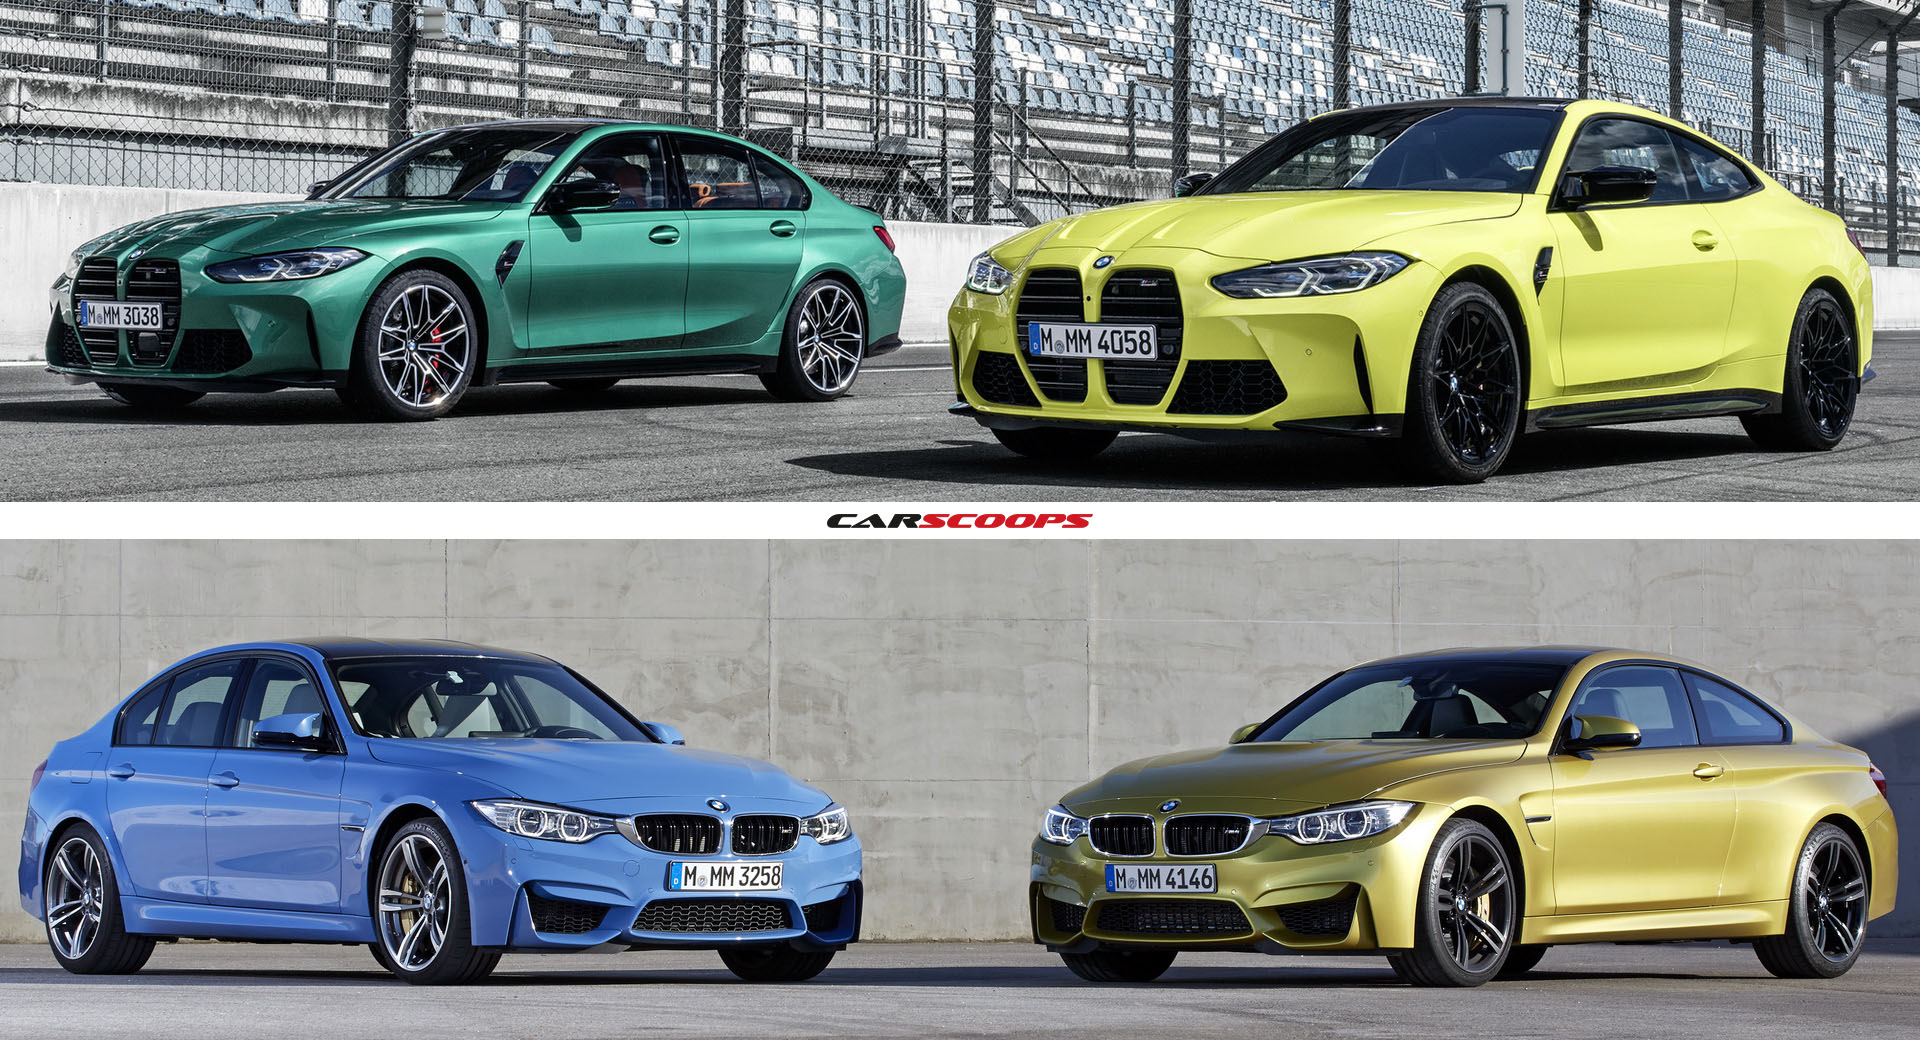 See How The Old And New BMW M3 Sedan And M4 Compare - CarScoops